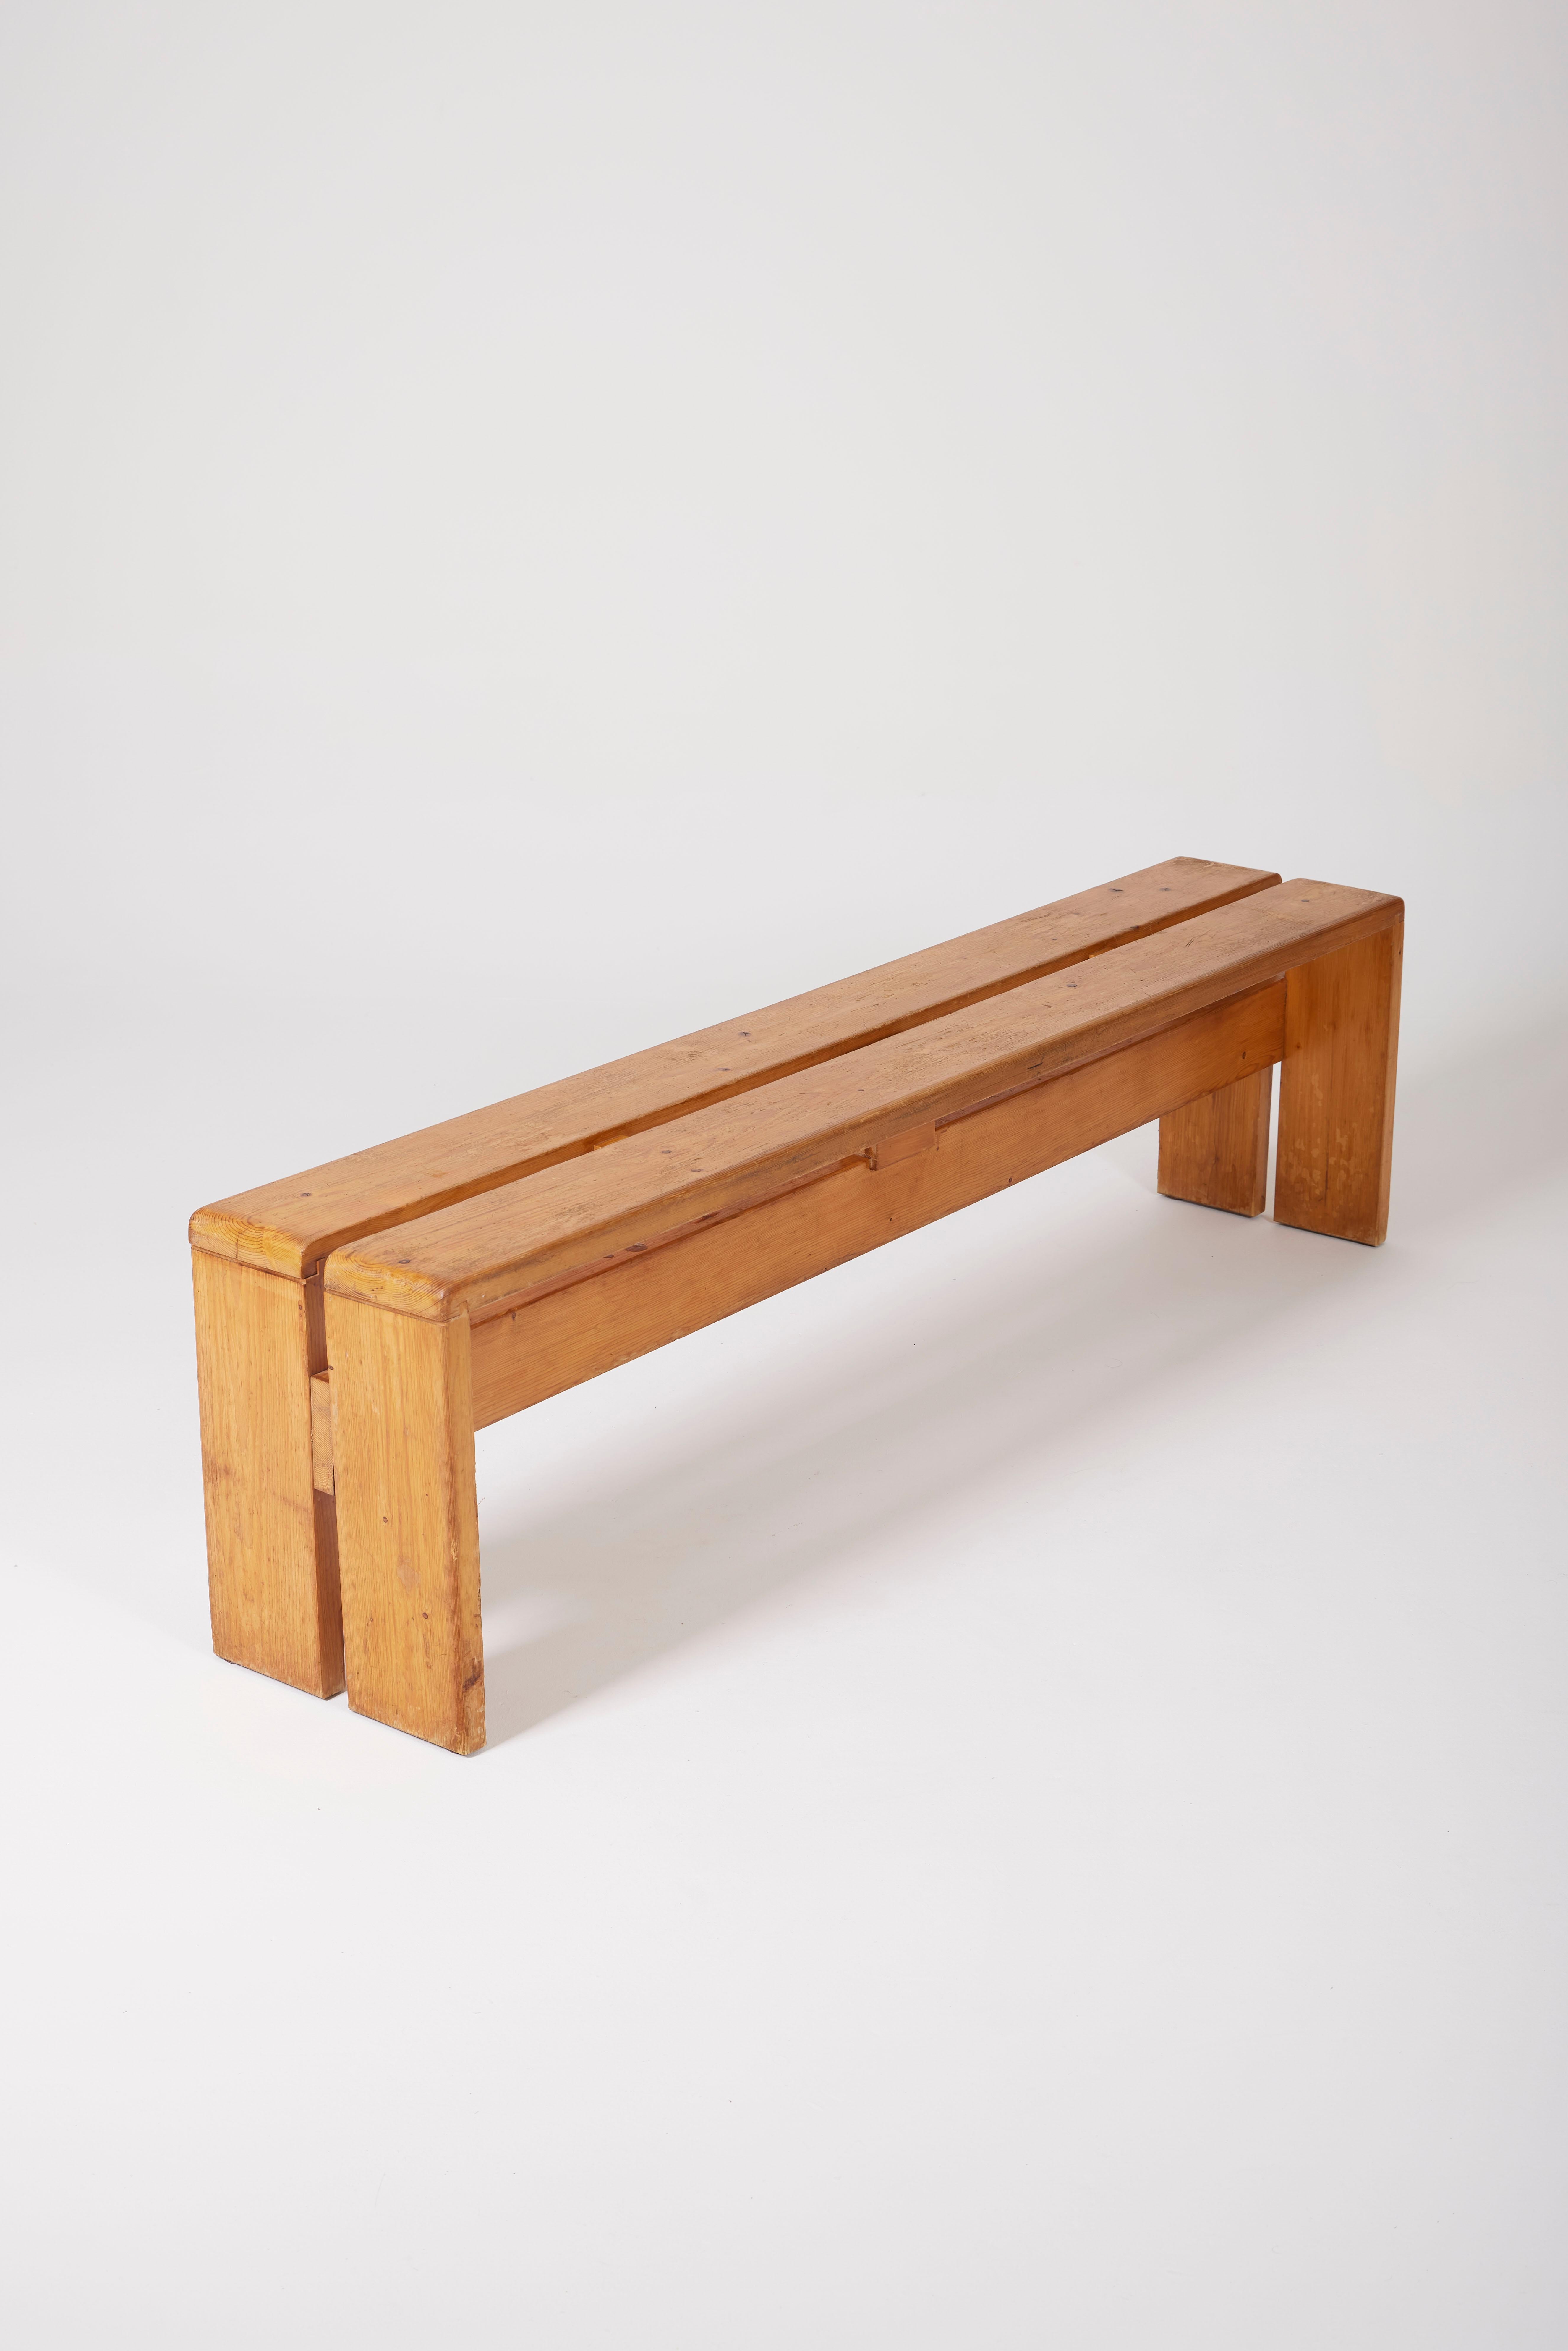 Pine Charlotte Perriand wooden bench For Sale